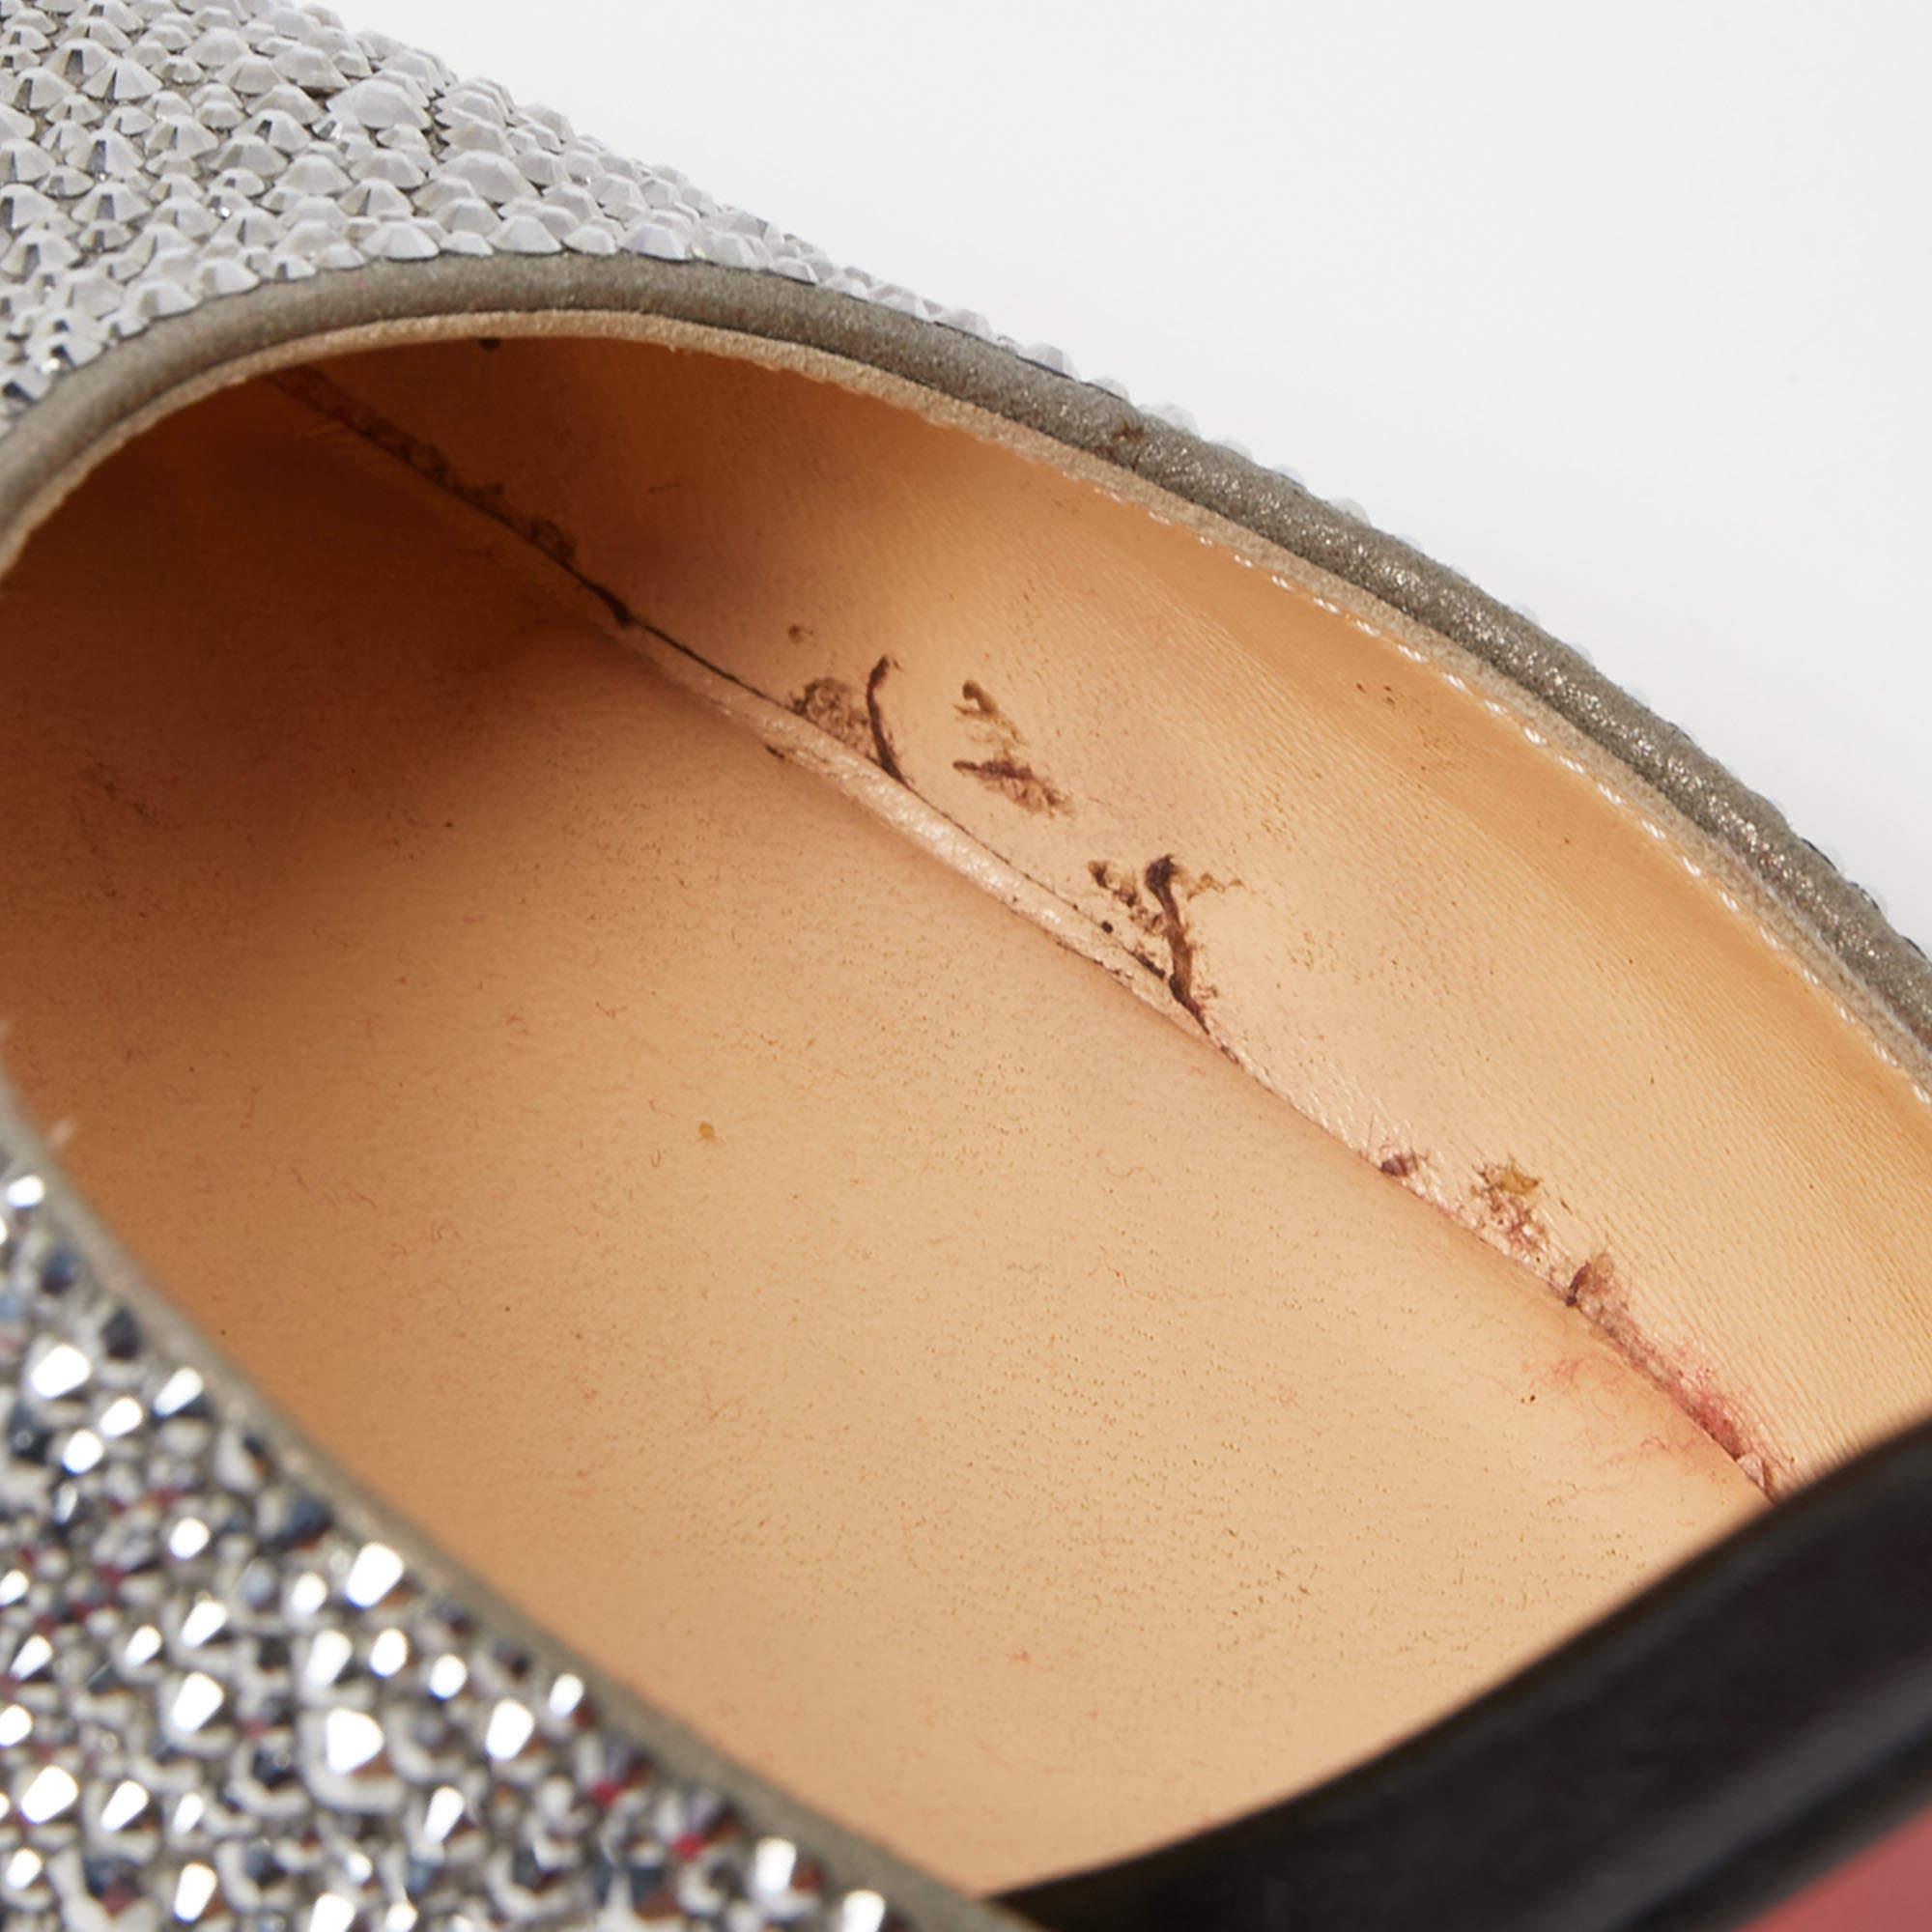 Christian Louboutin Grey/Black Suede and Leather Rivierina Strass Pumps Size 39 For Sale 1